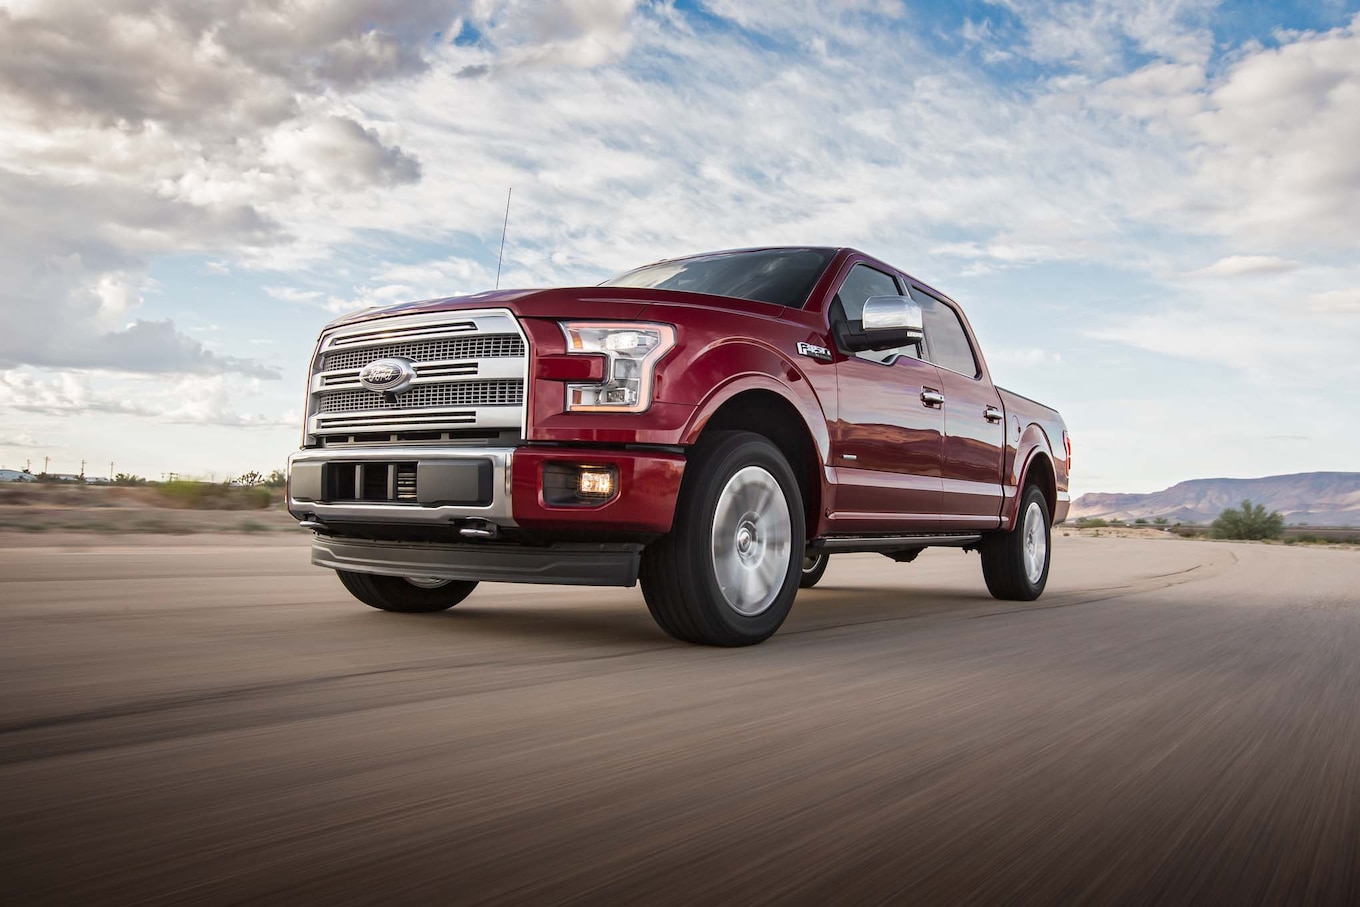 2017 Ford F 150 Platinum 4x4 EcoBoost front three quarter in motion 04